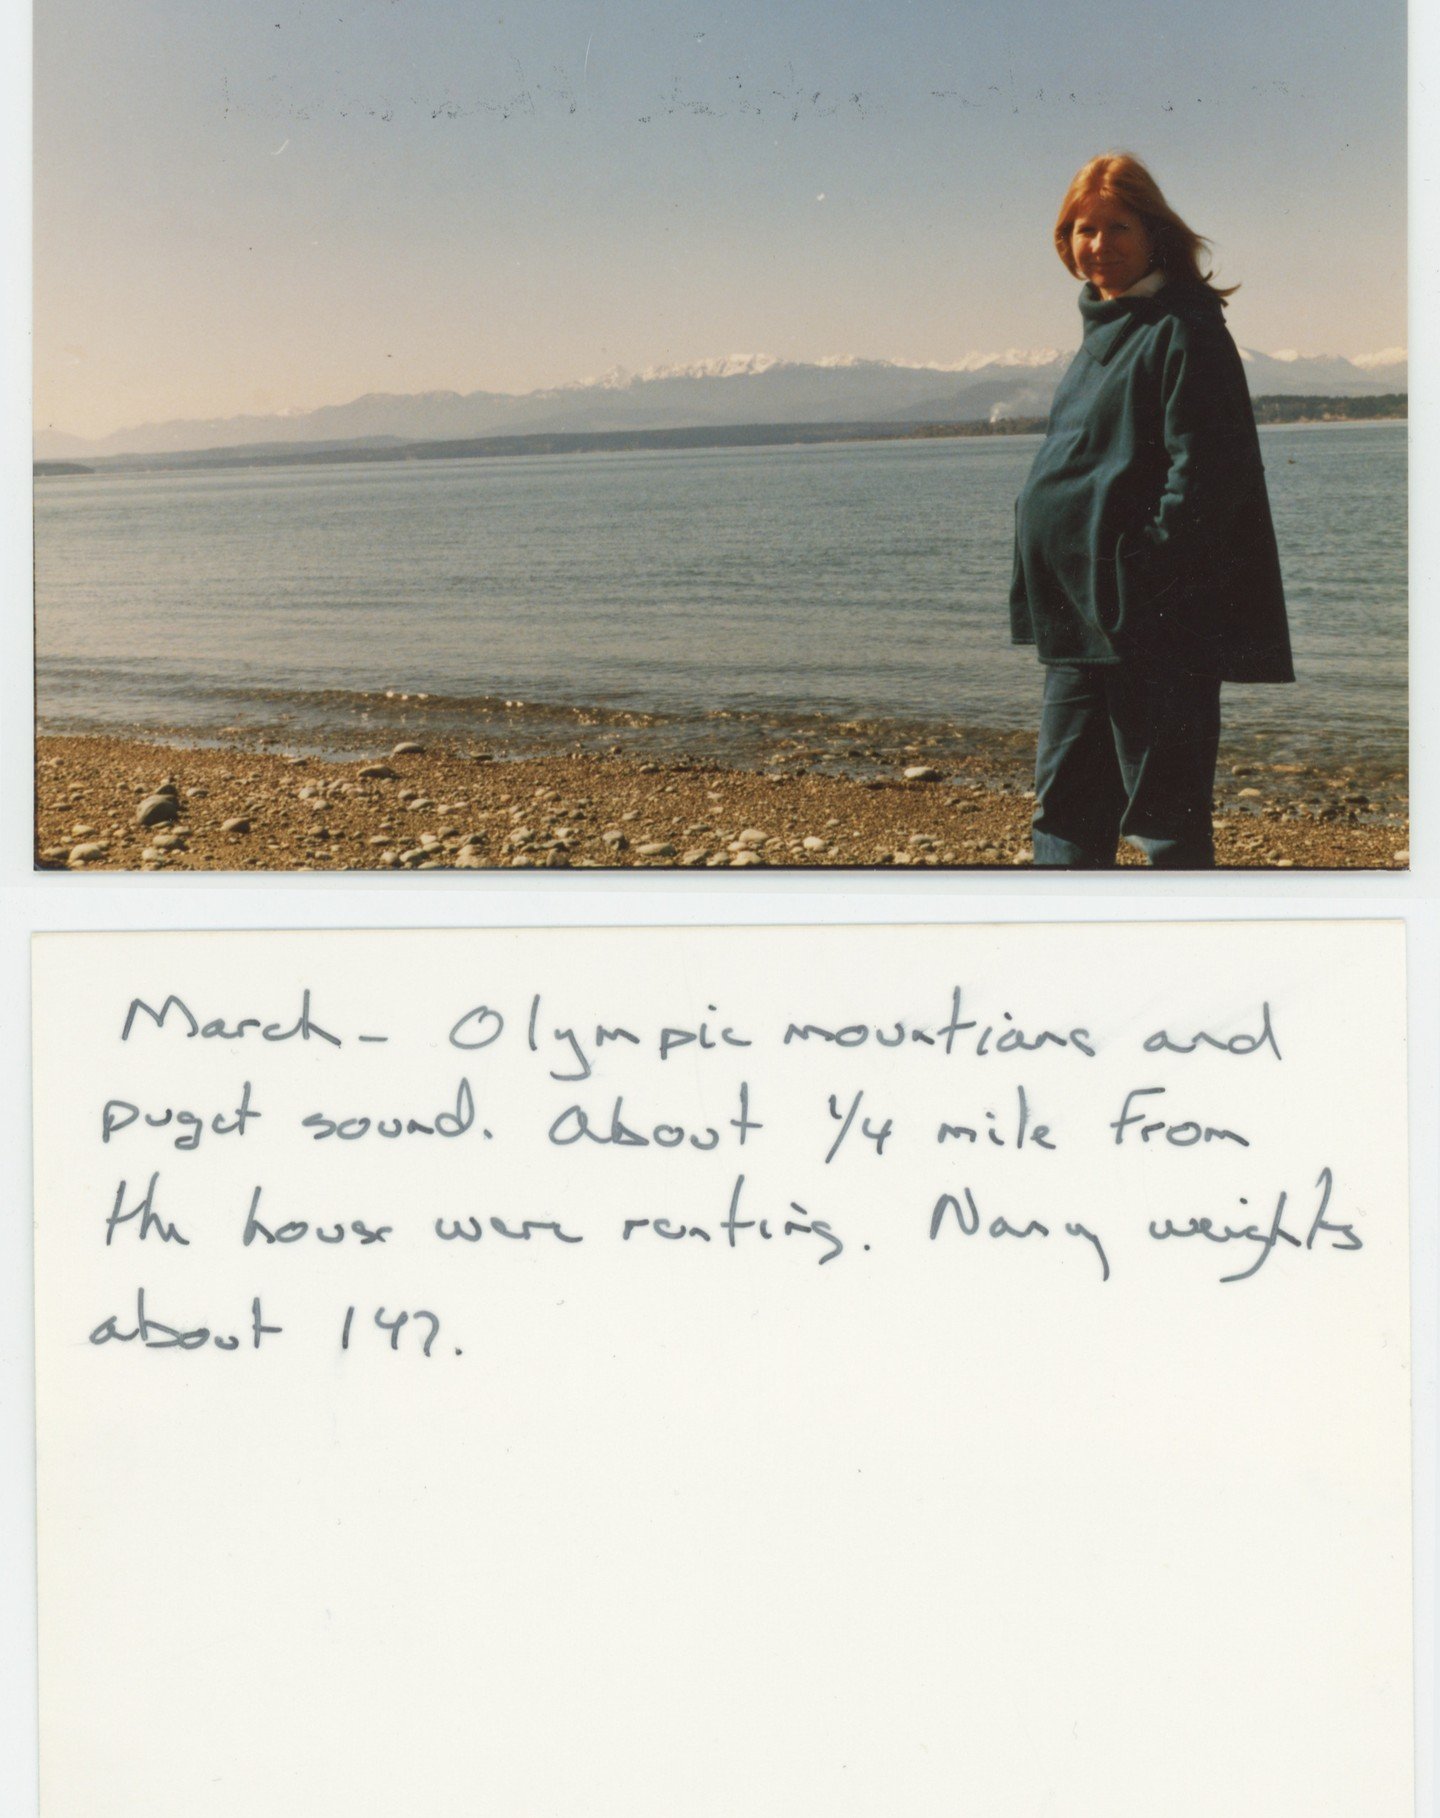 This caption my dad wrote has made me laugh for years. Why??? Happy mother's day, Mom!

&quot;March - Olympic mountians [sp] and Puget Sound. About 1/4 mile from the house were [sp] renting. Nancy weights [sp] about 147.&quot;

That house we were ren